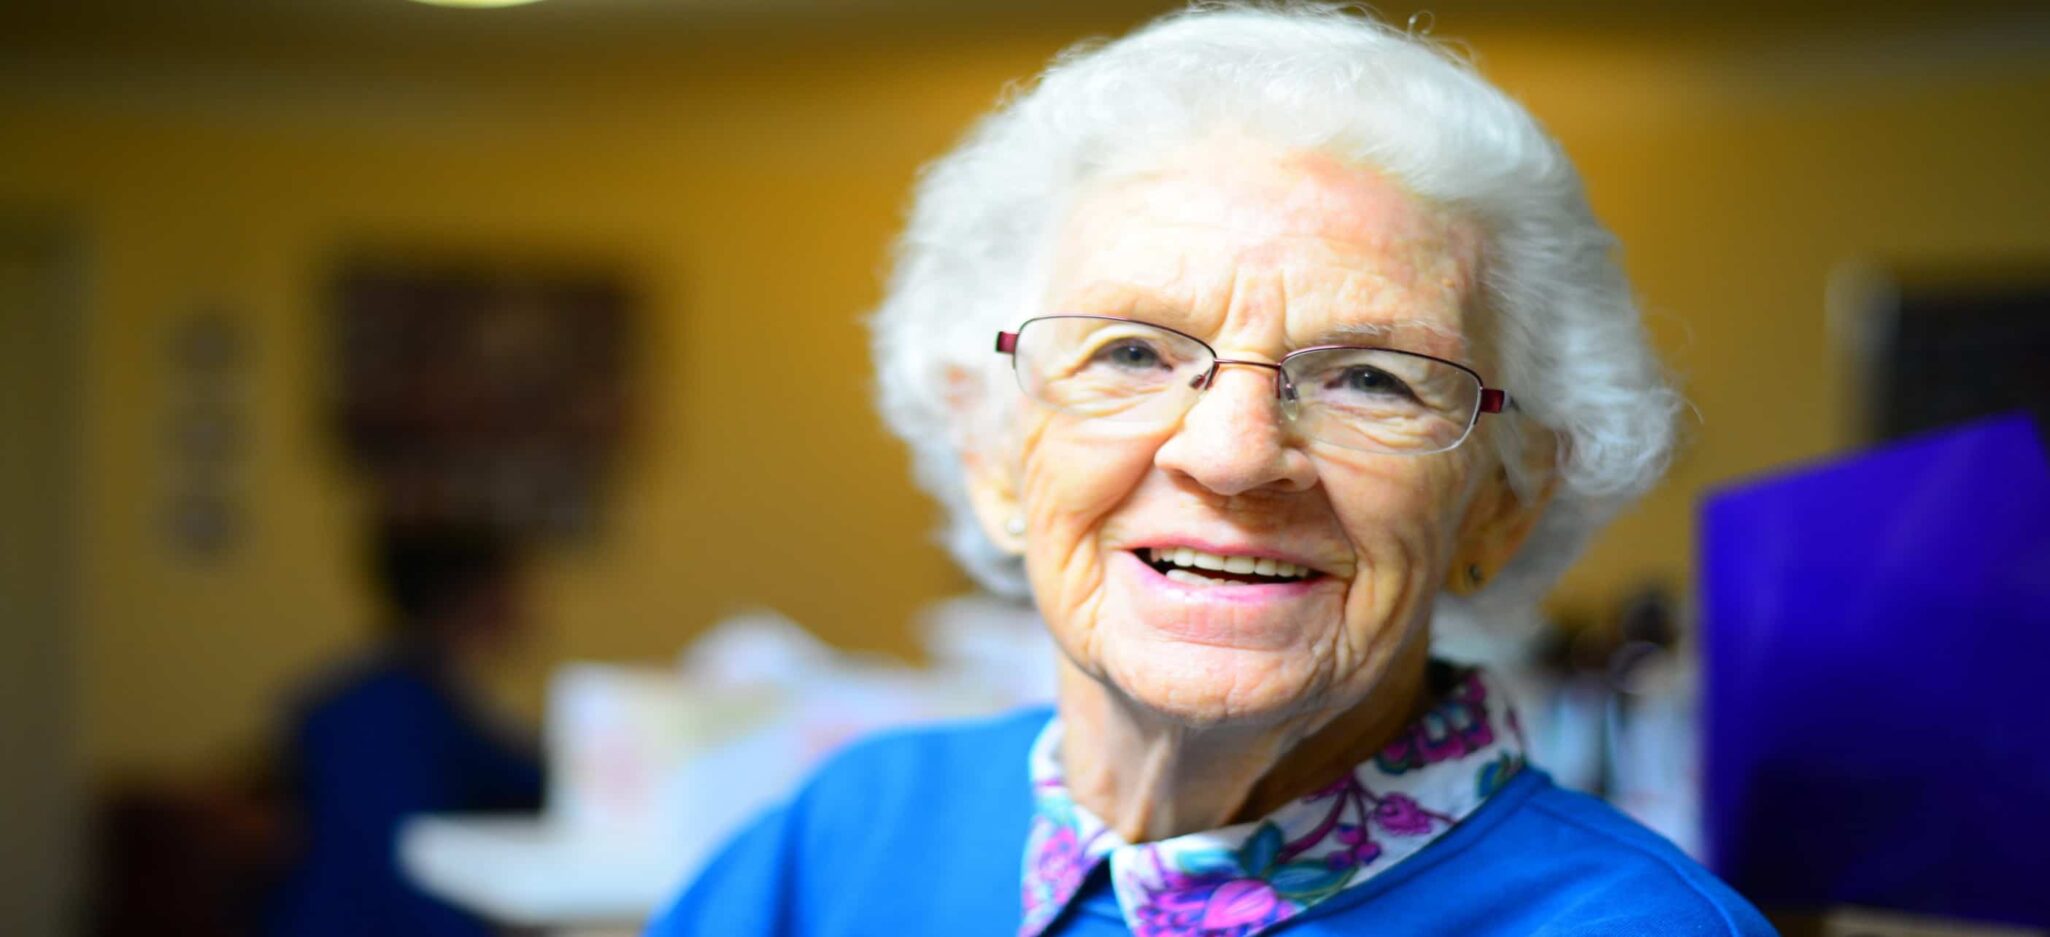 Smiling elderly woman with glasses